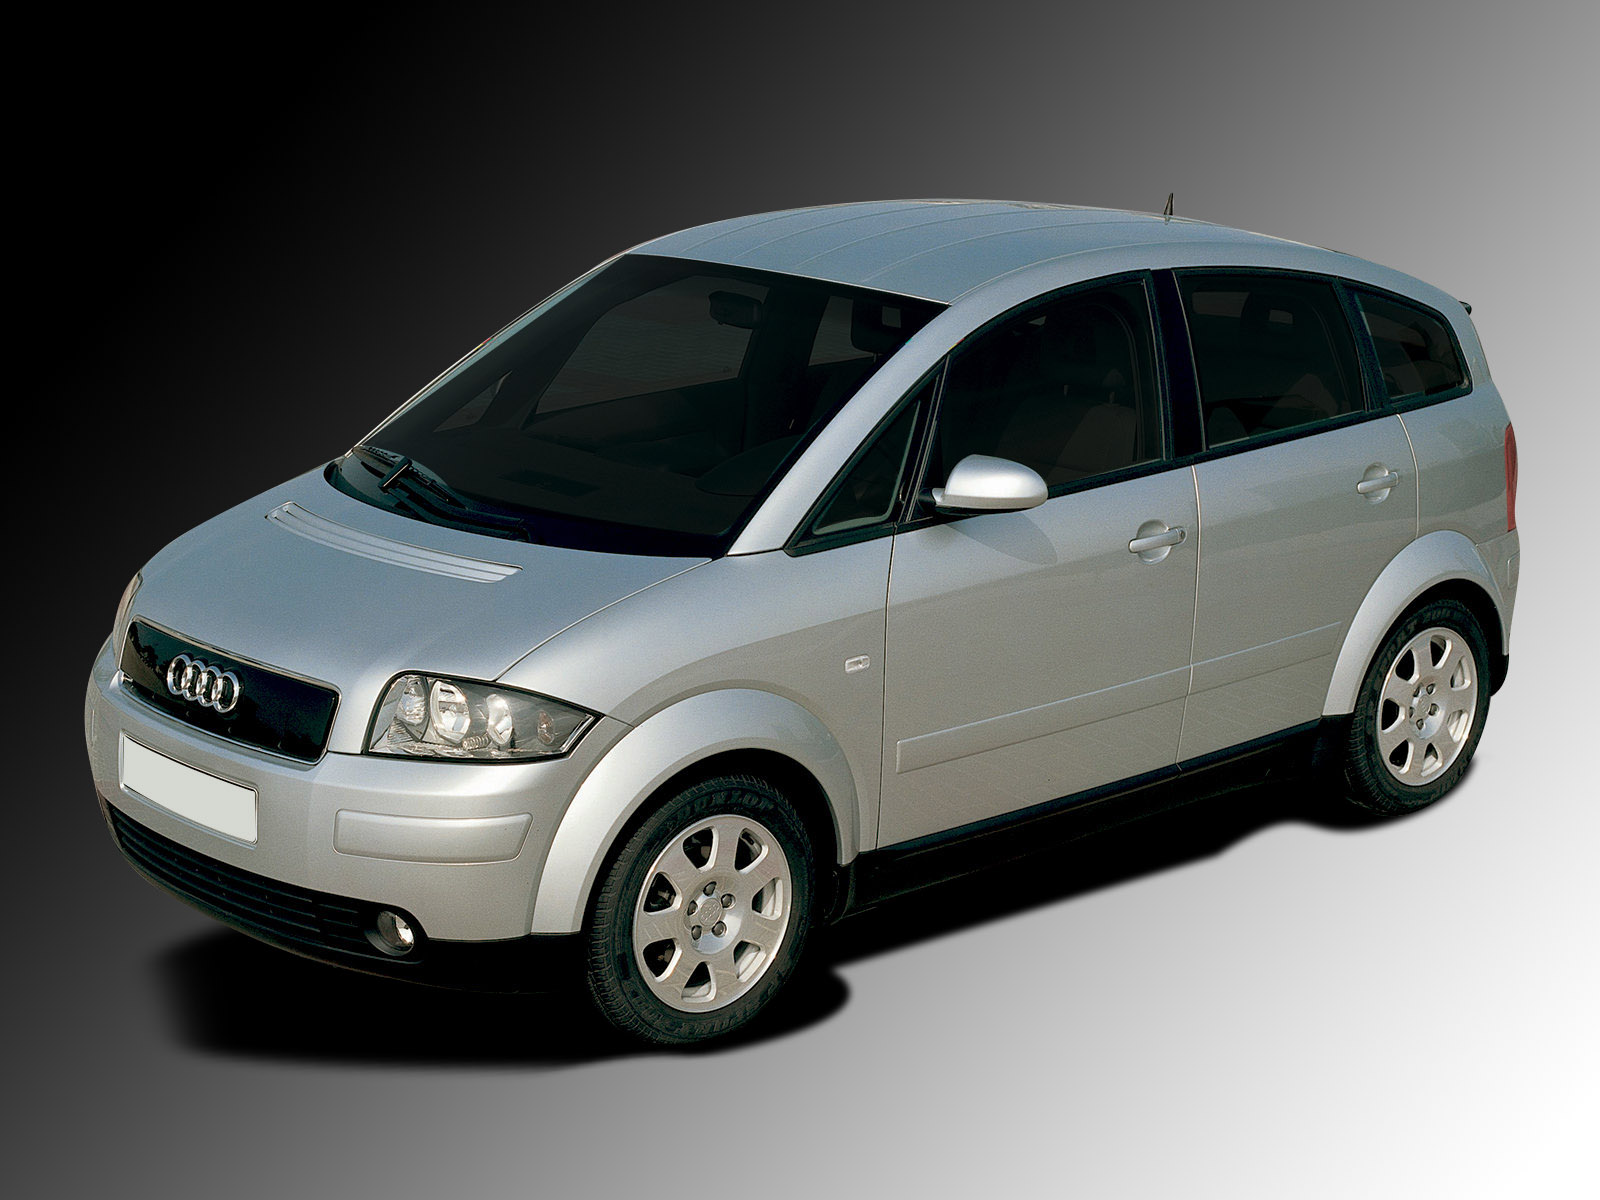 Audi A2 Engine Replacement